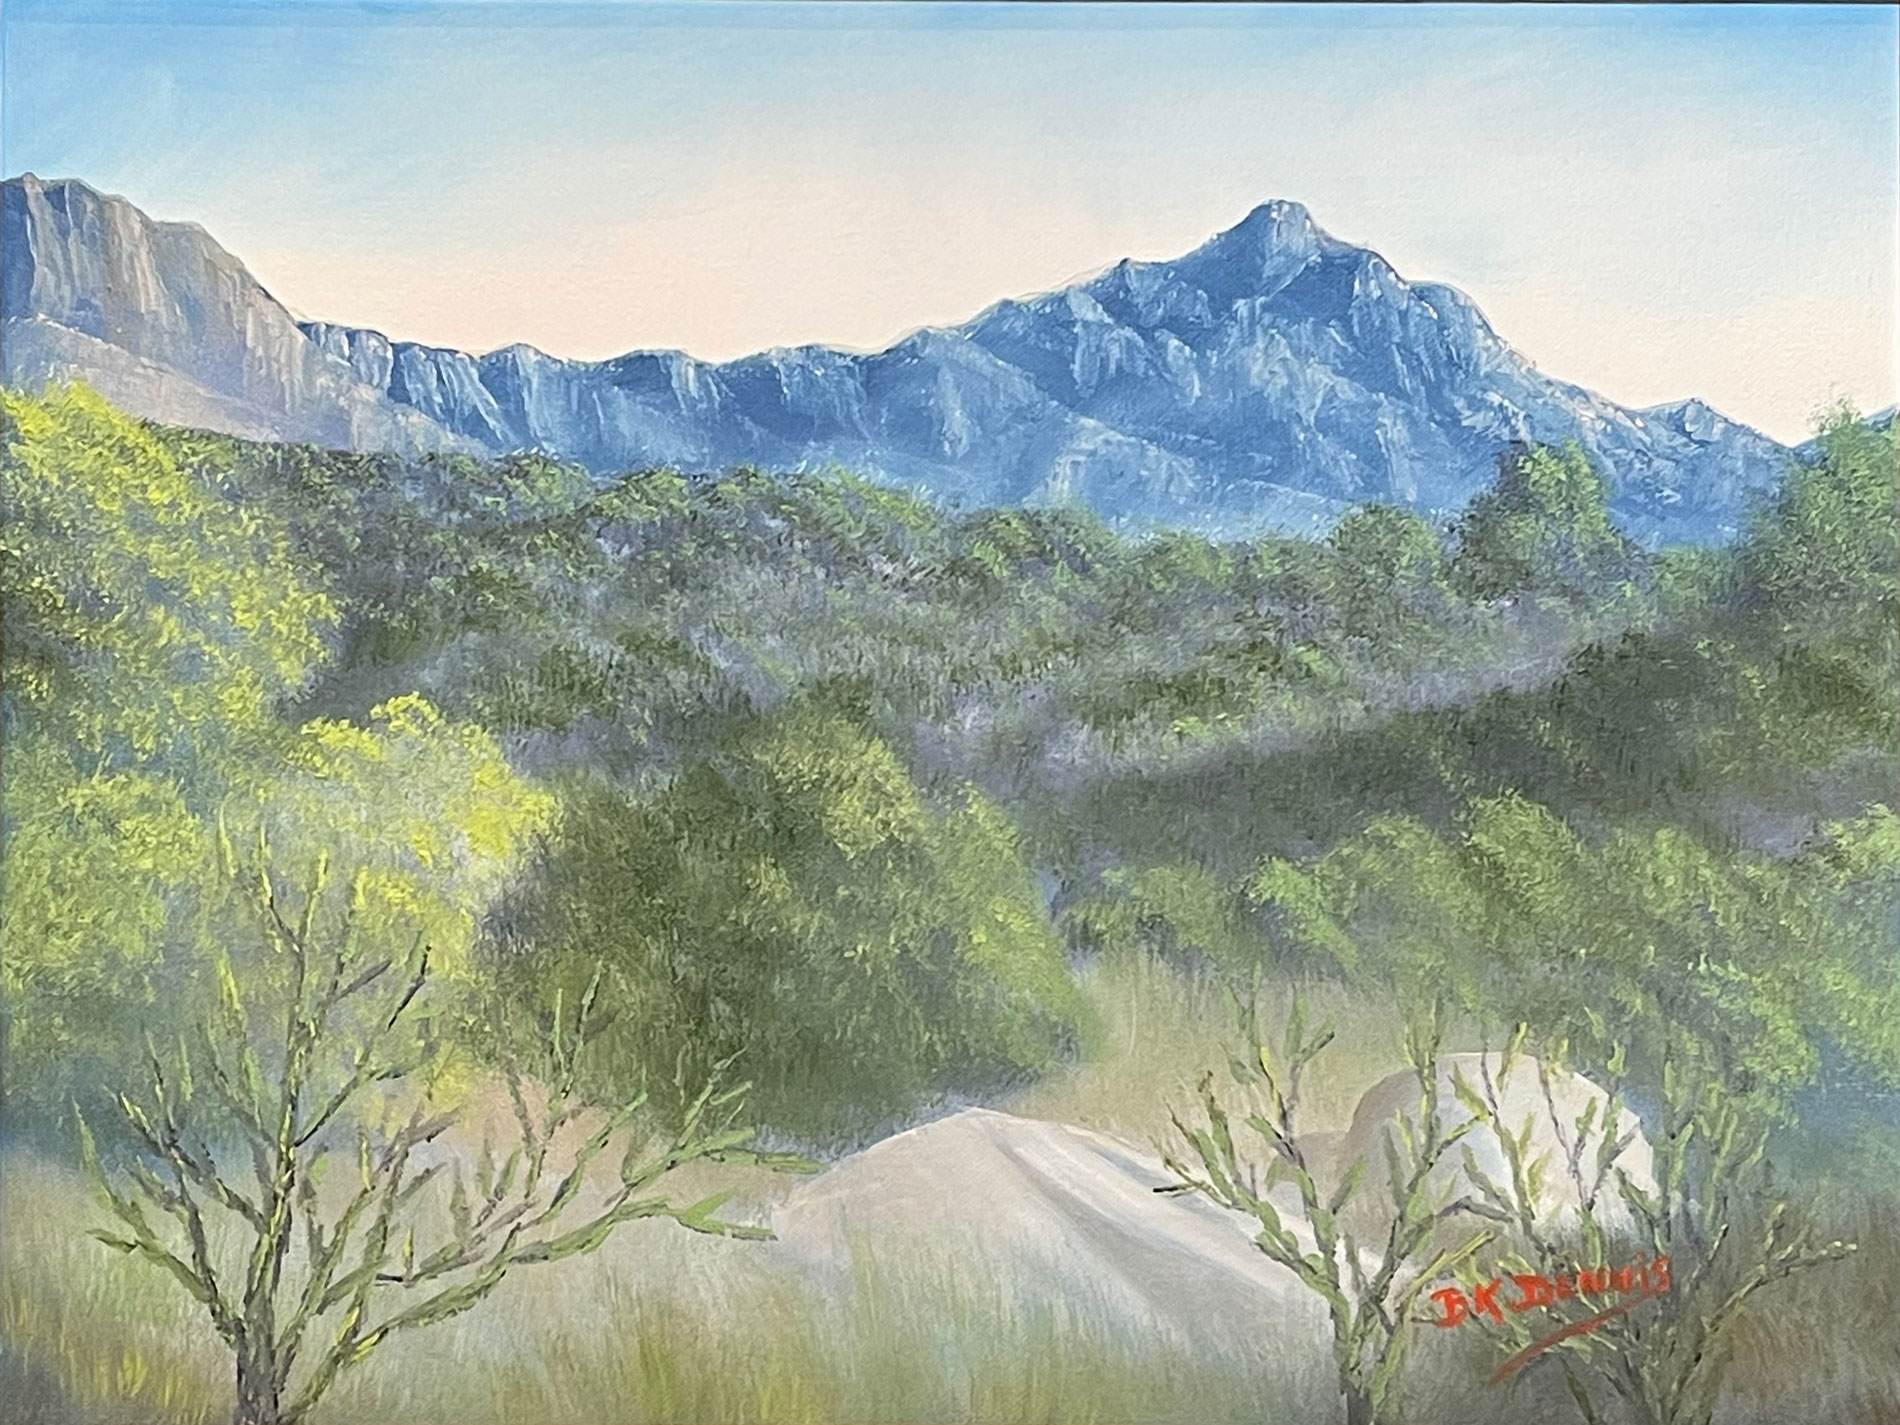 Oil painting by B.K. Dennis of Alpine, TX, of a mountain in the Big Bend National Park with green trees and other brush in the foreground.